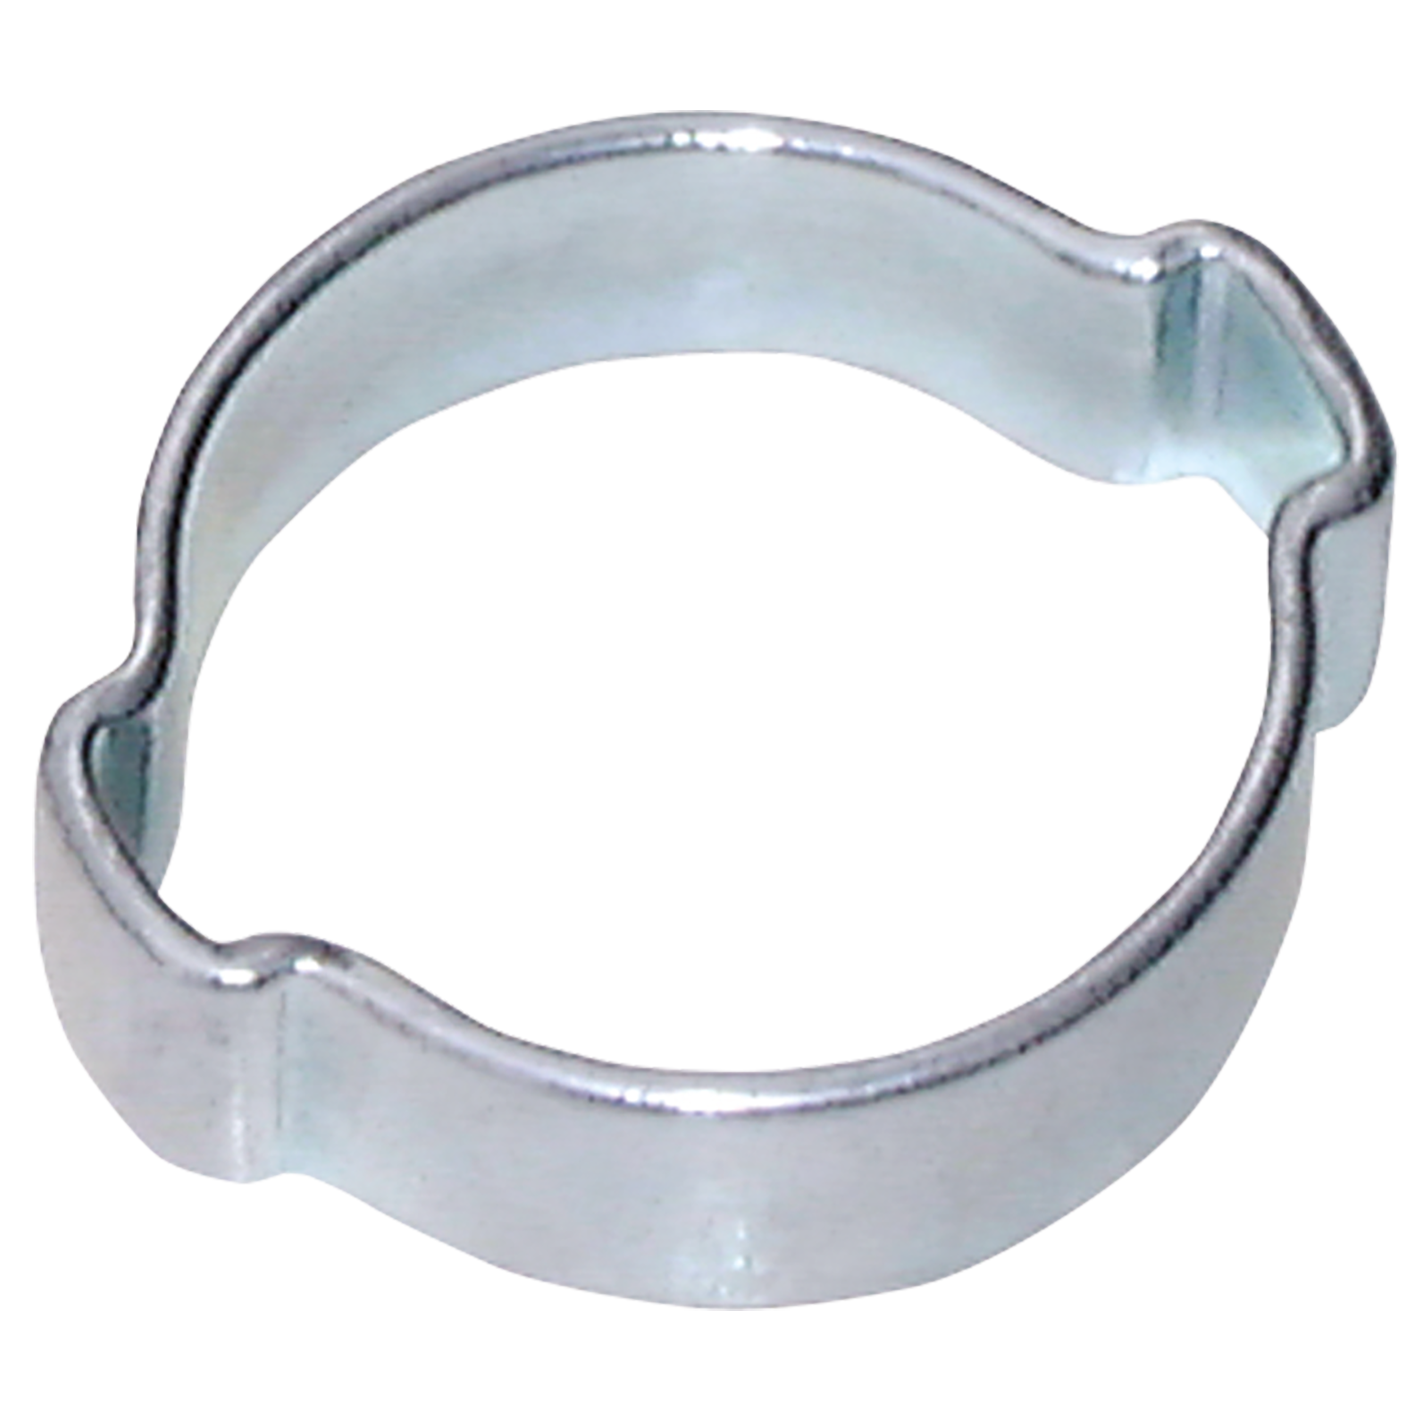 34.0-37.0MM 2-EAR STEEL CLAMP PLATED